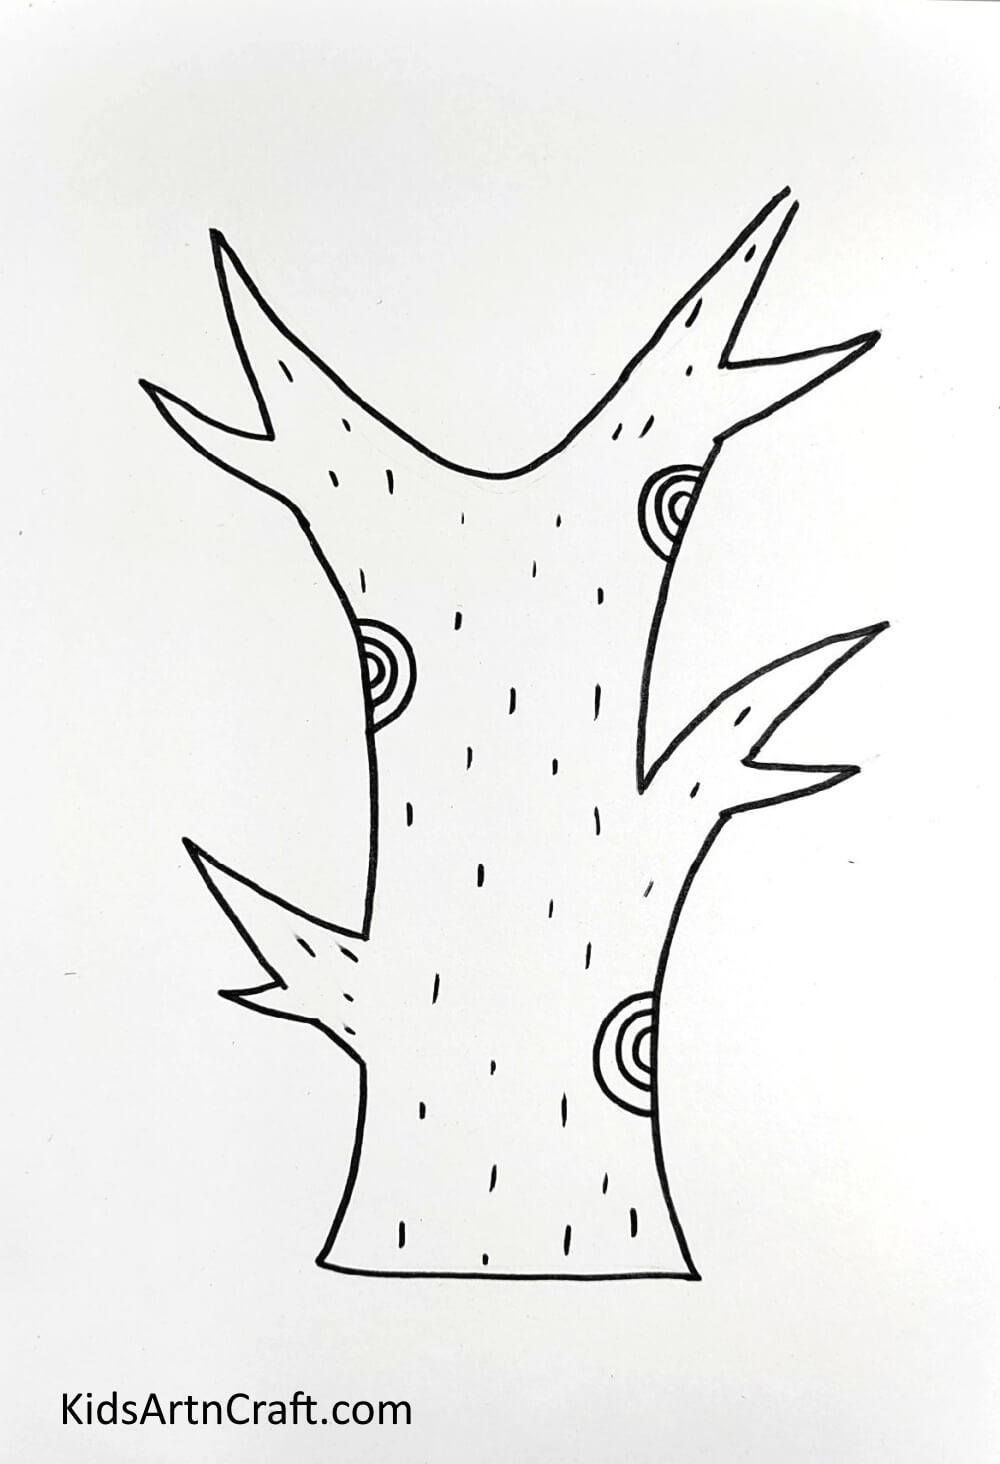 Drawing A Tree Stem - Learn the steps to draw tree quickly